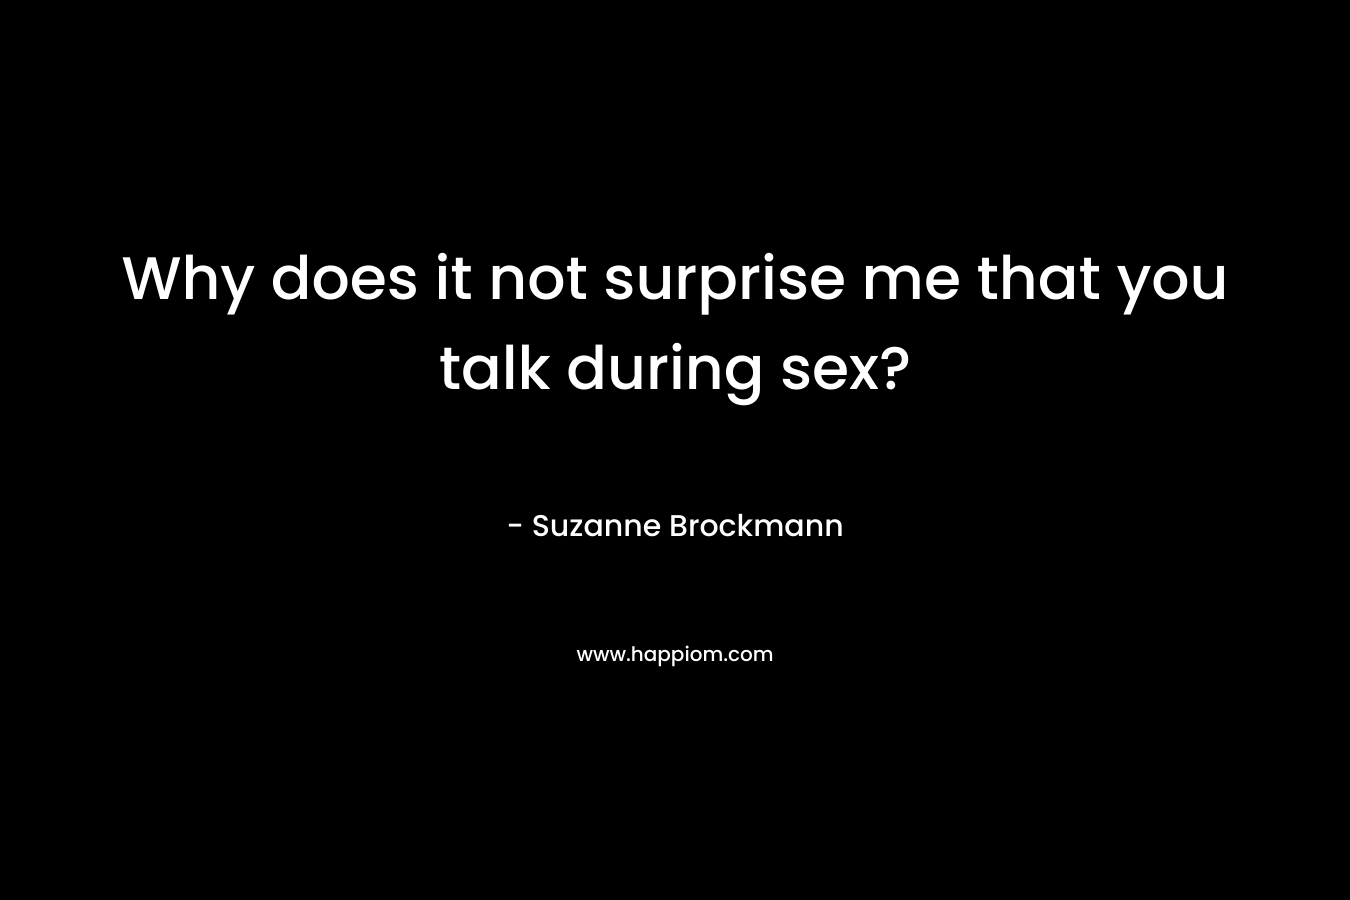 Why does it not surprise me that you talk during sex? – Suzanne Brockmann